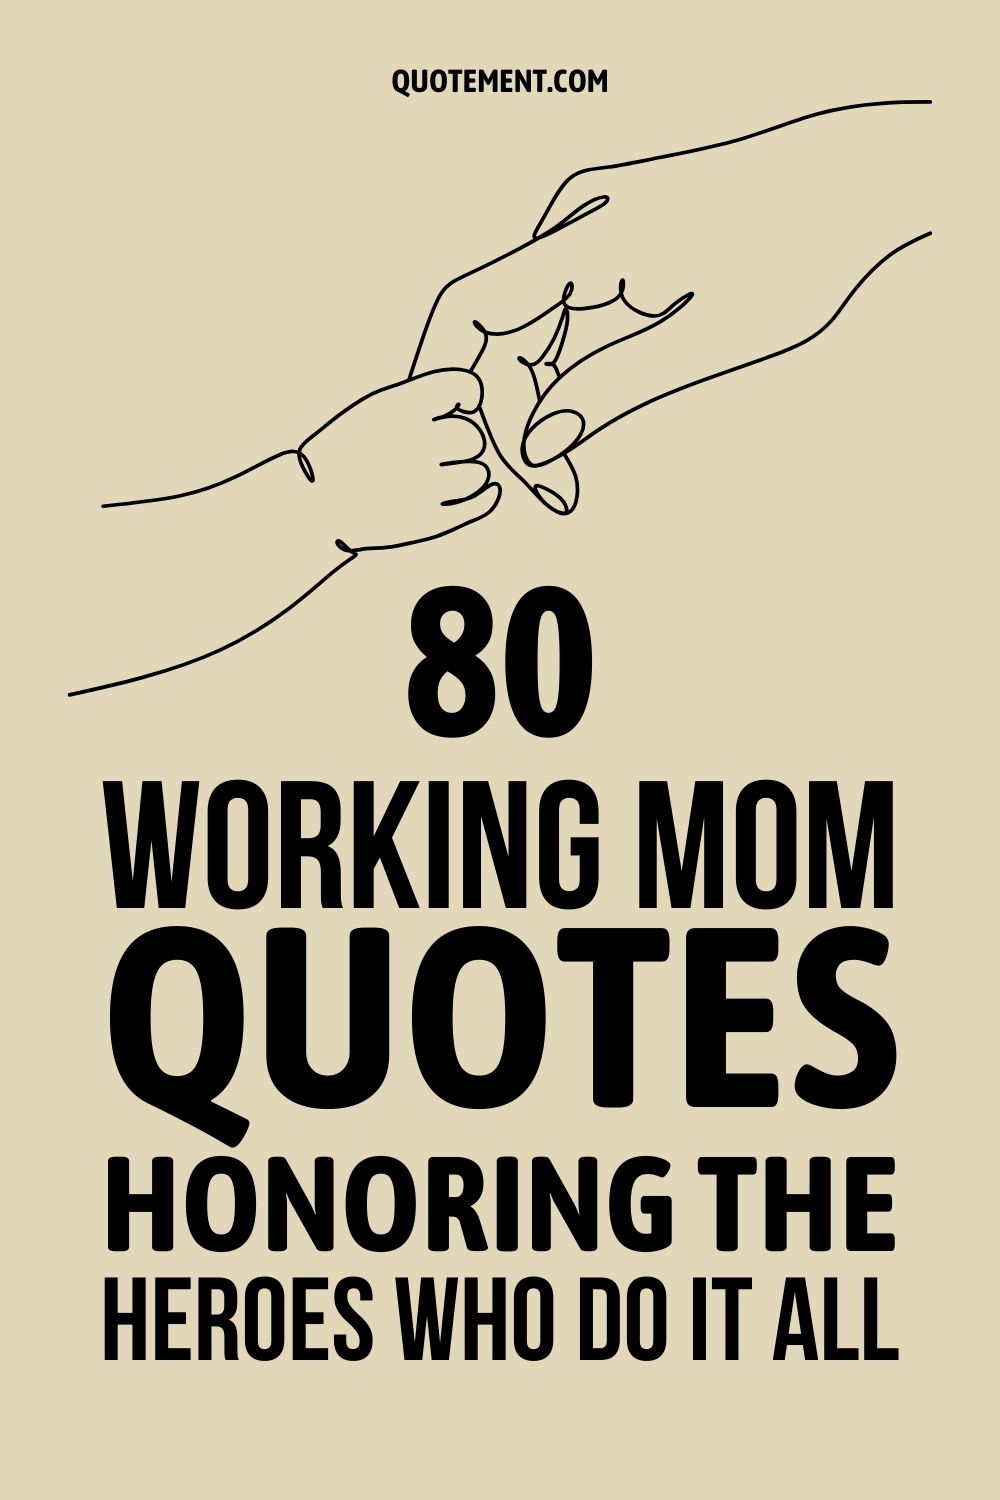 80 Working Mom Quotes Honoring The Heroes Who Do It All
